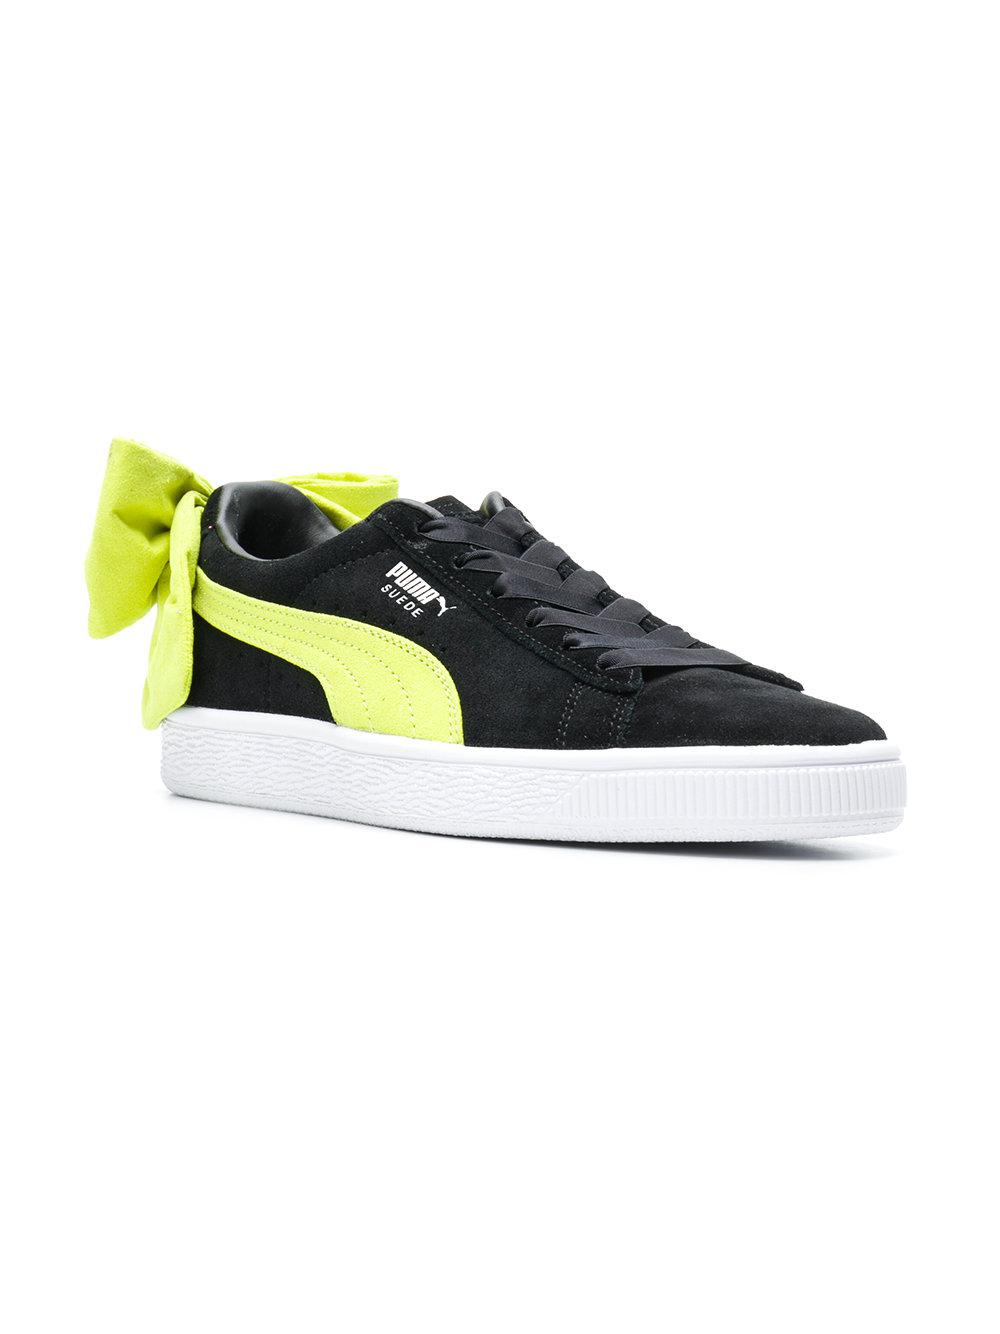 PUMA Bow Back Sneakers in Black | Lyst